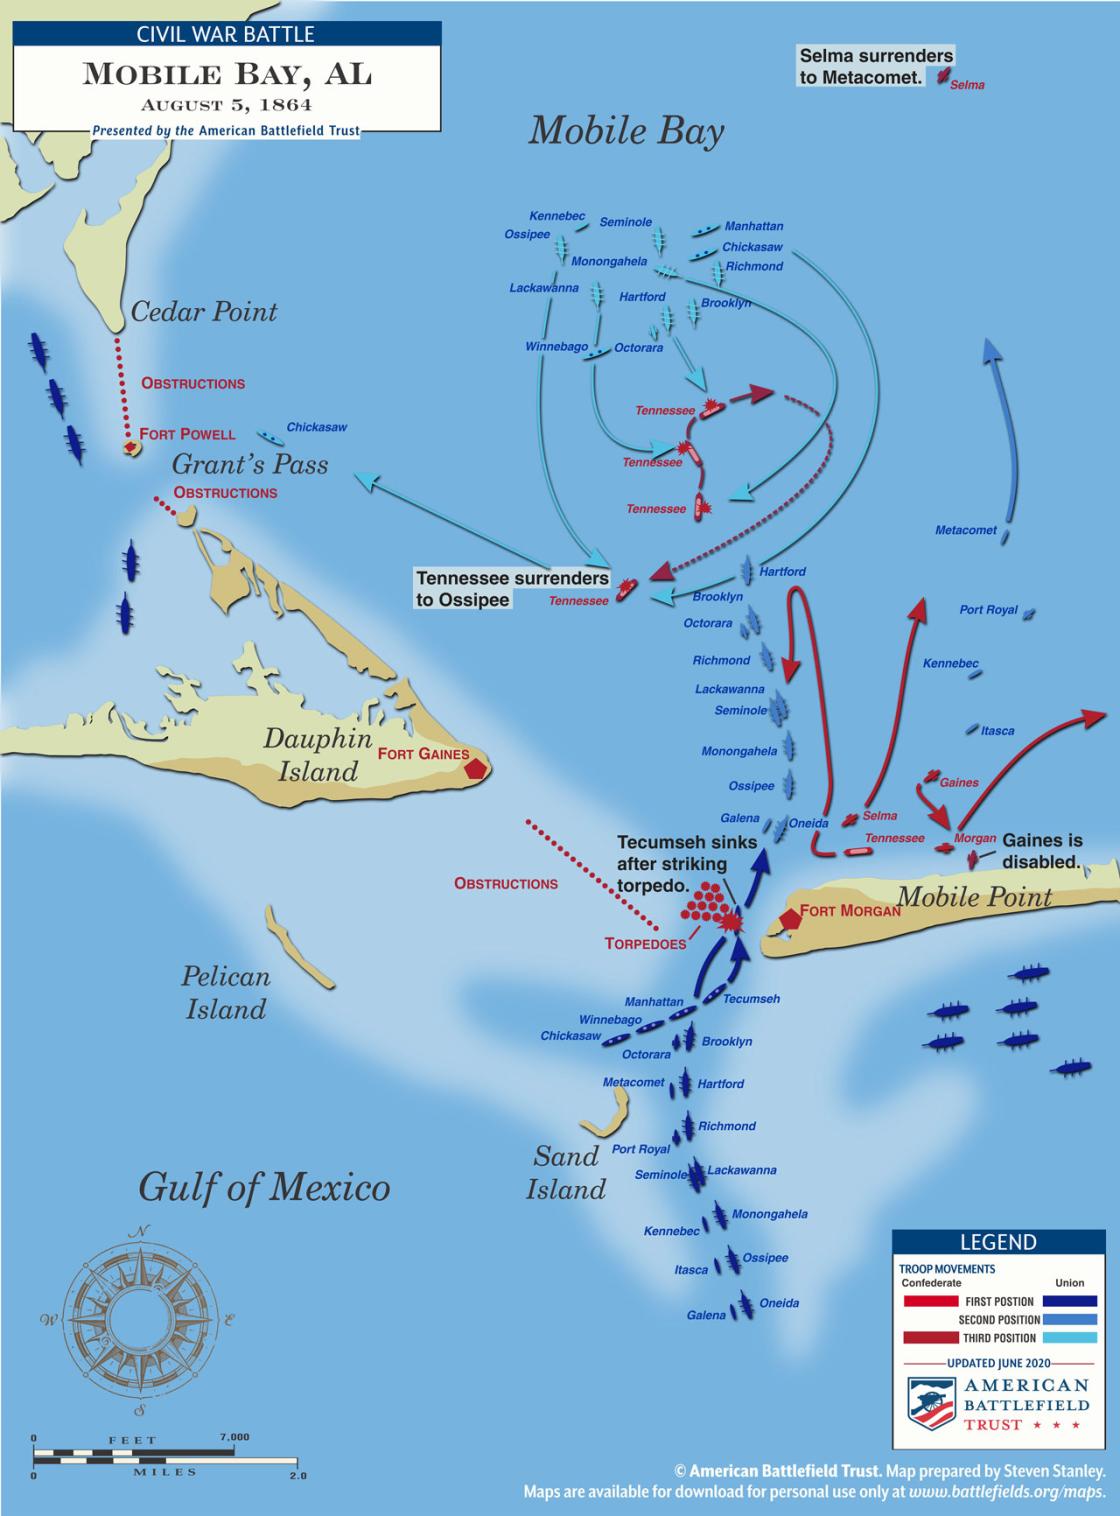 A map of the Battle of Mobile Bay on August 5, 1864.